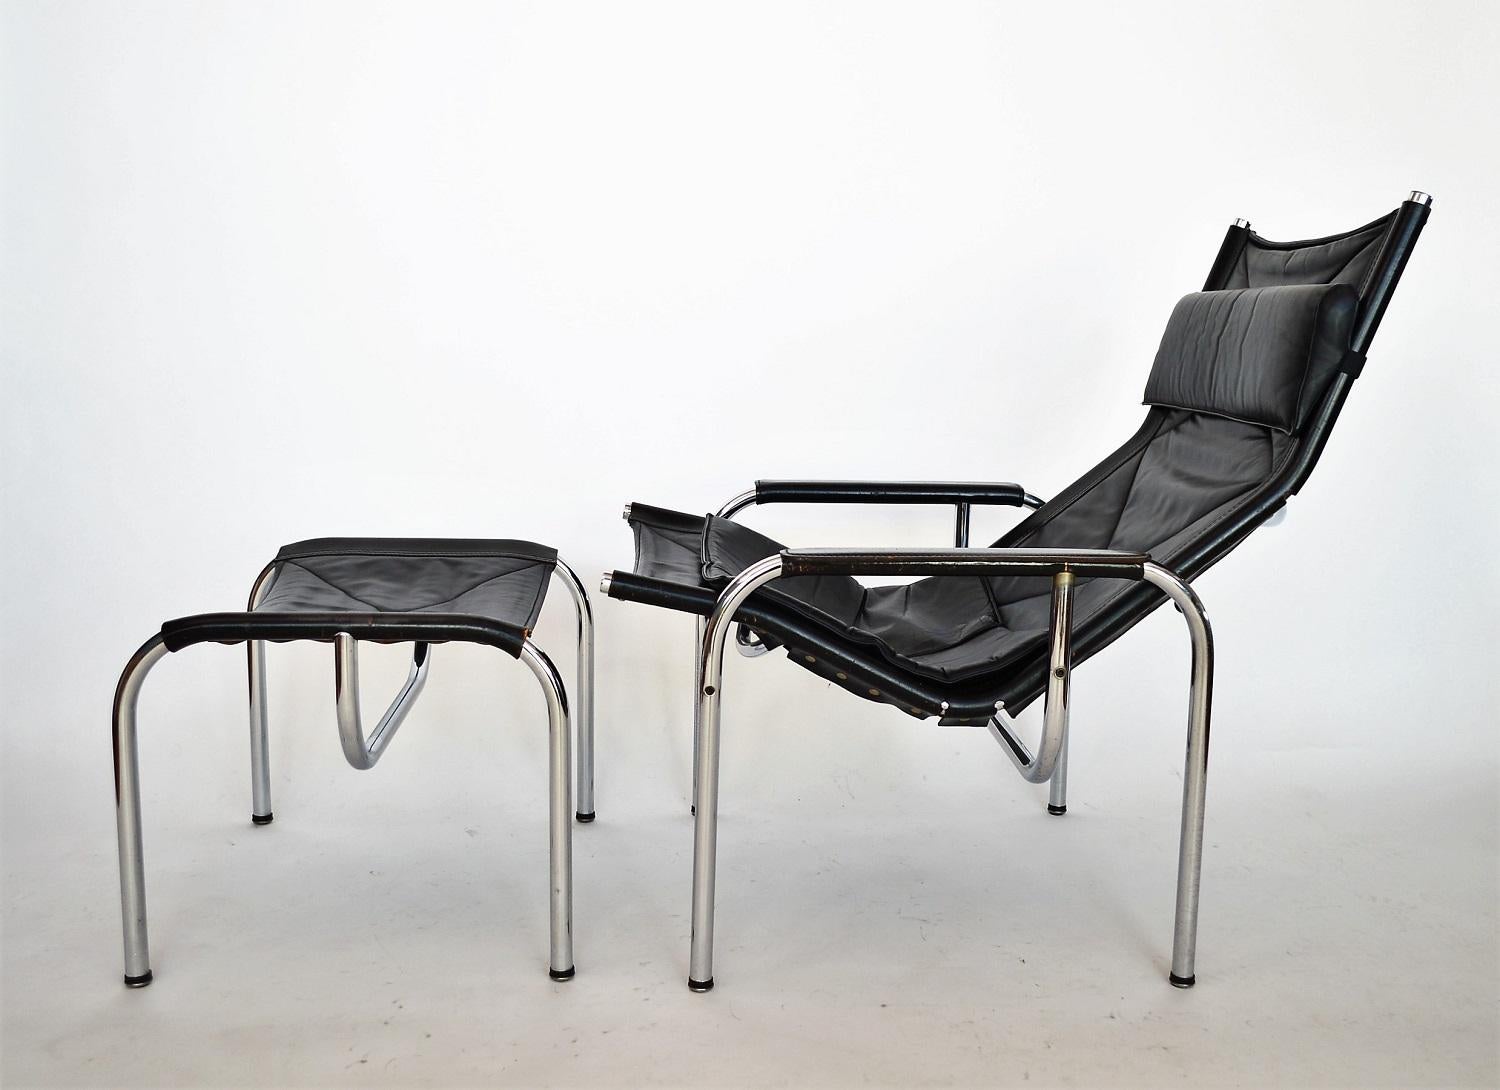 Complete set of black lounge chair with ottoman, headrest and leather cushion designed from Hans Eichenberger for Swiss company Strässle.
Designed and produced during the 1970s.
Good vintage condition with signs of wear and age on the leather.